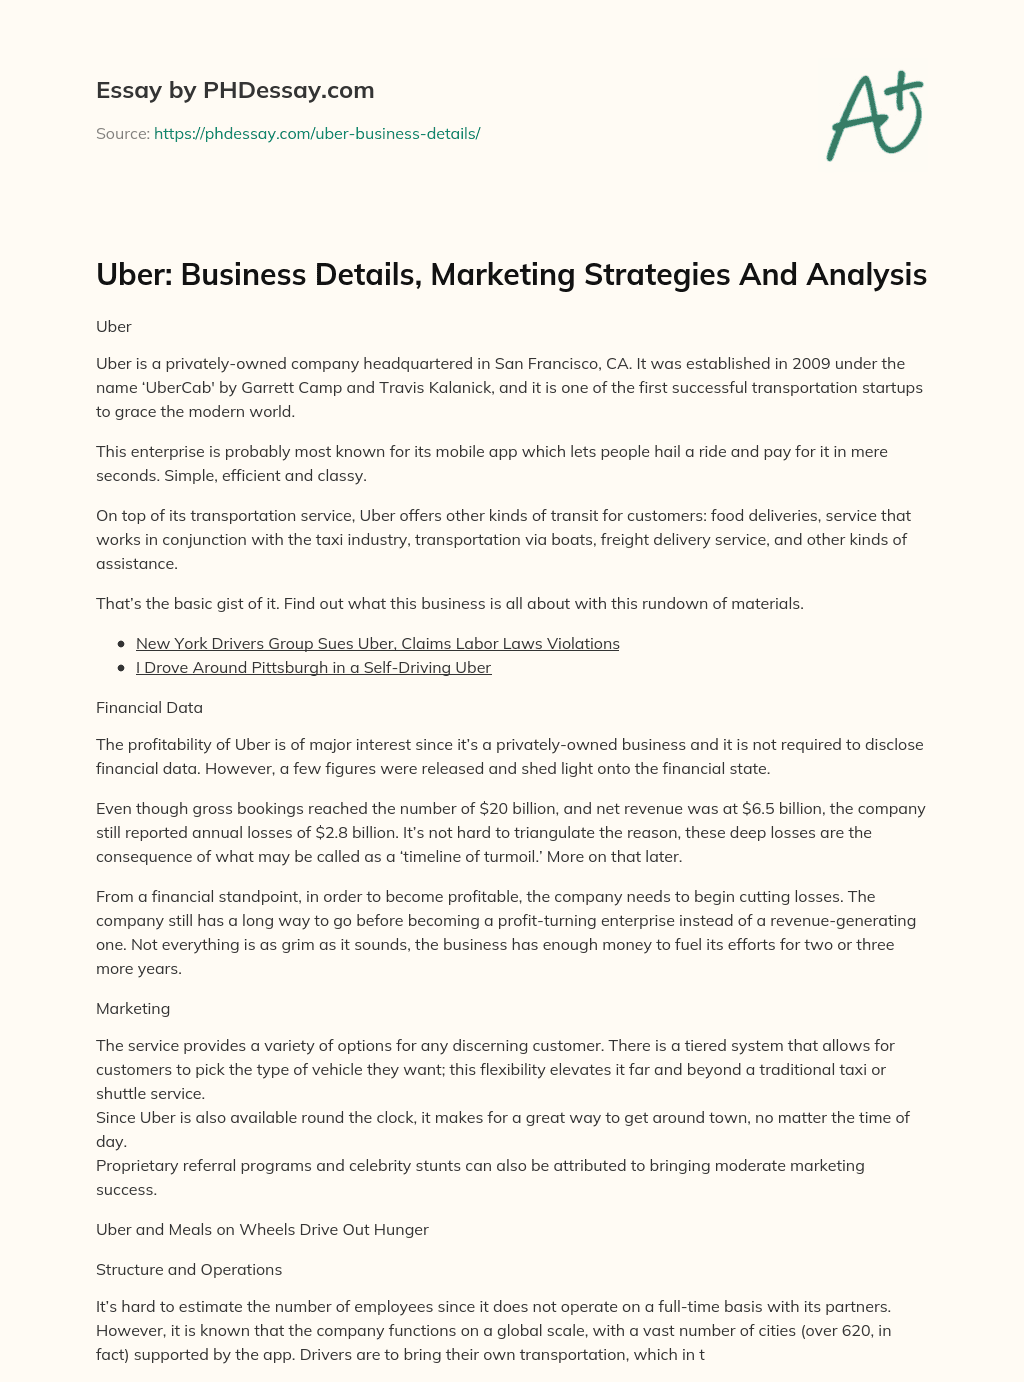 Uber: Business Details, Marketing Strategies And Analysis essay